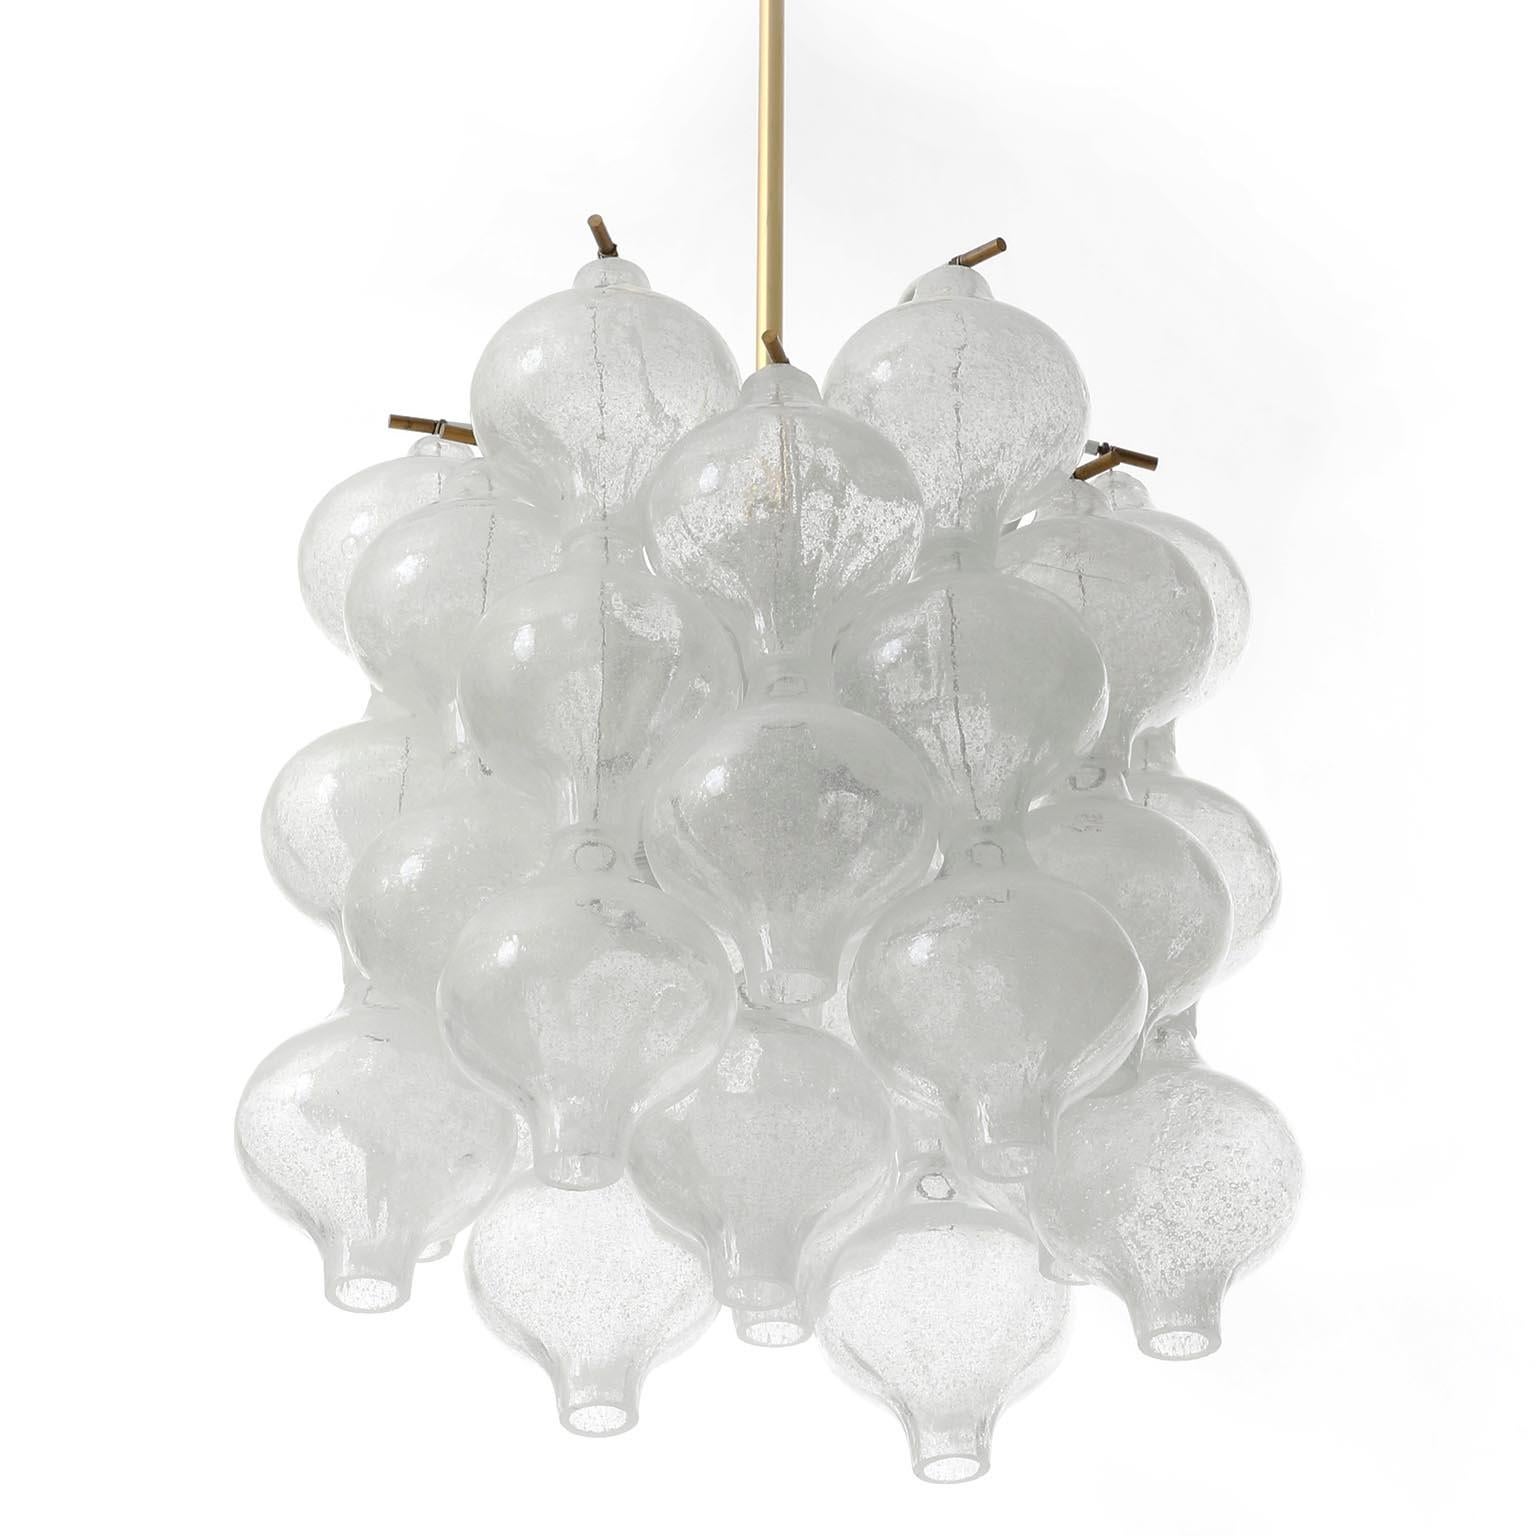 One of two fantastic light fixtures model Tulipan by J.T. Kalmar, Vienna, Austria, manufactured in midcentury, circa 1970 (late 1960s or early 1970s).
The name Tulipan derives from the tulip shaped hand blown bubble glasses. Each glass is handmade